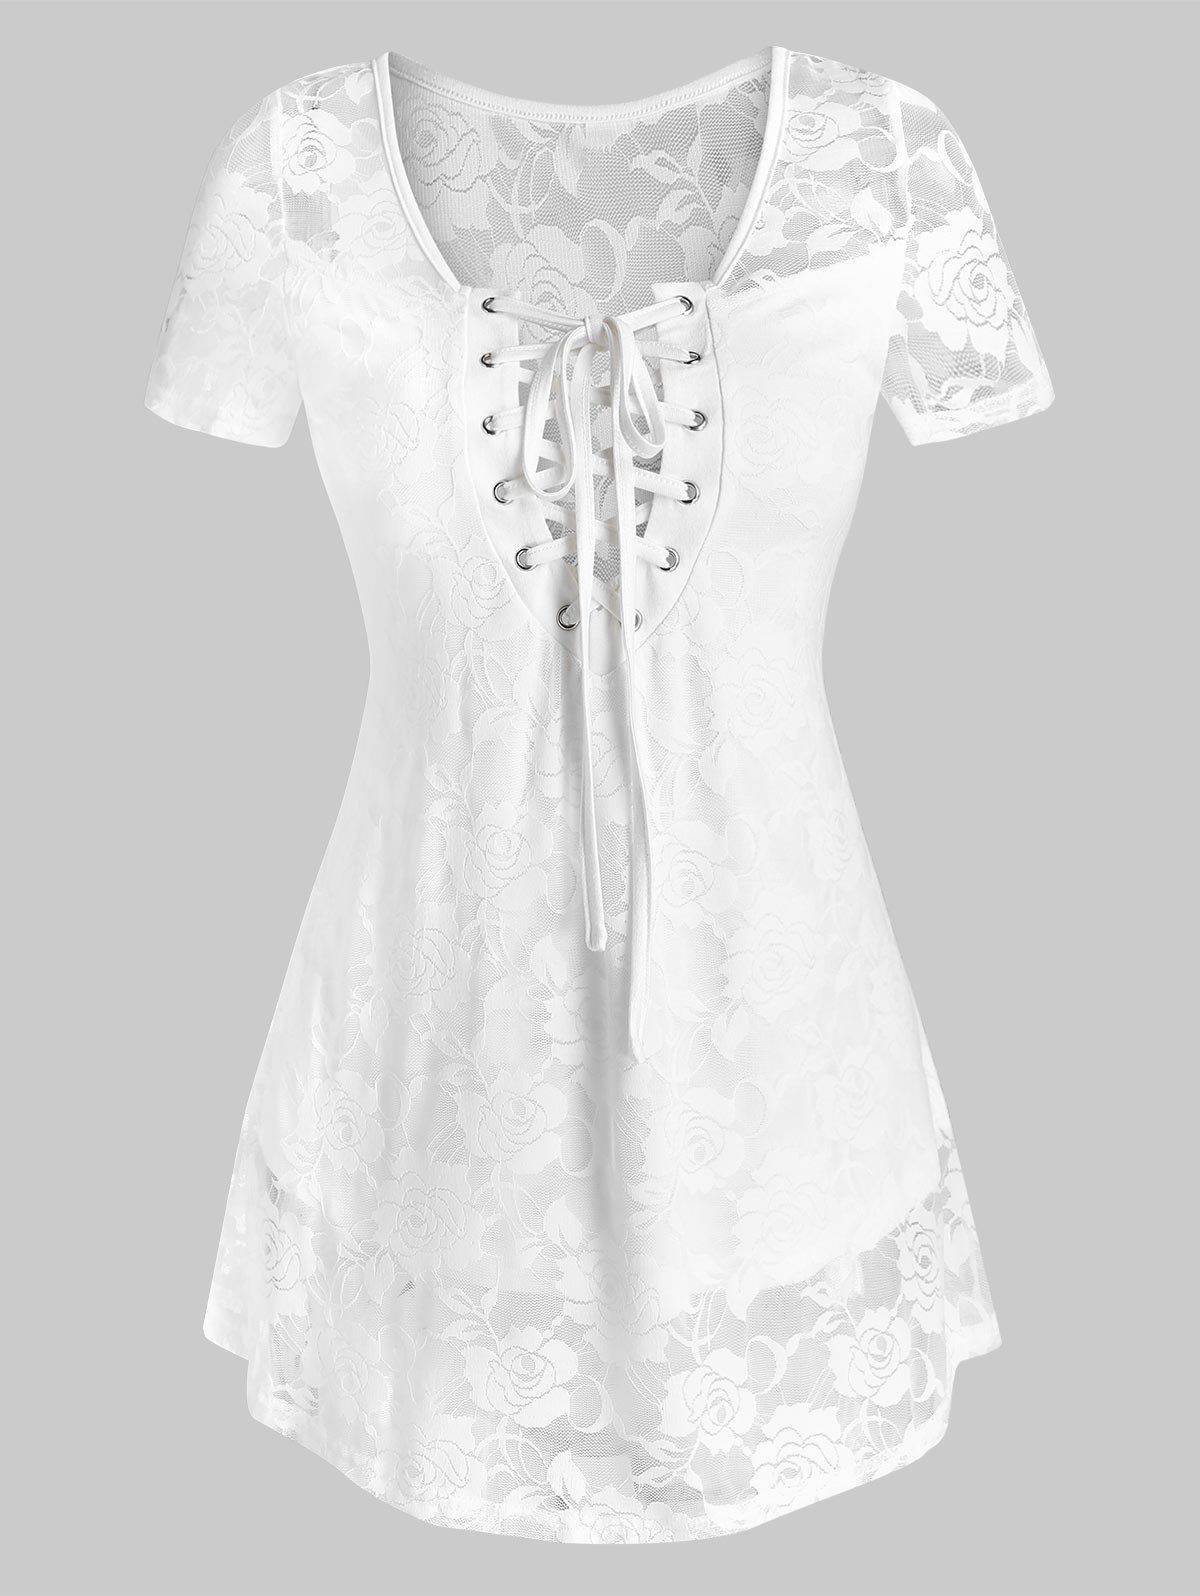 Floral Lace Sheer Lace Up Curved Hem See Through Top - WHITE 2XL